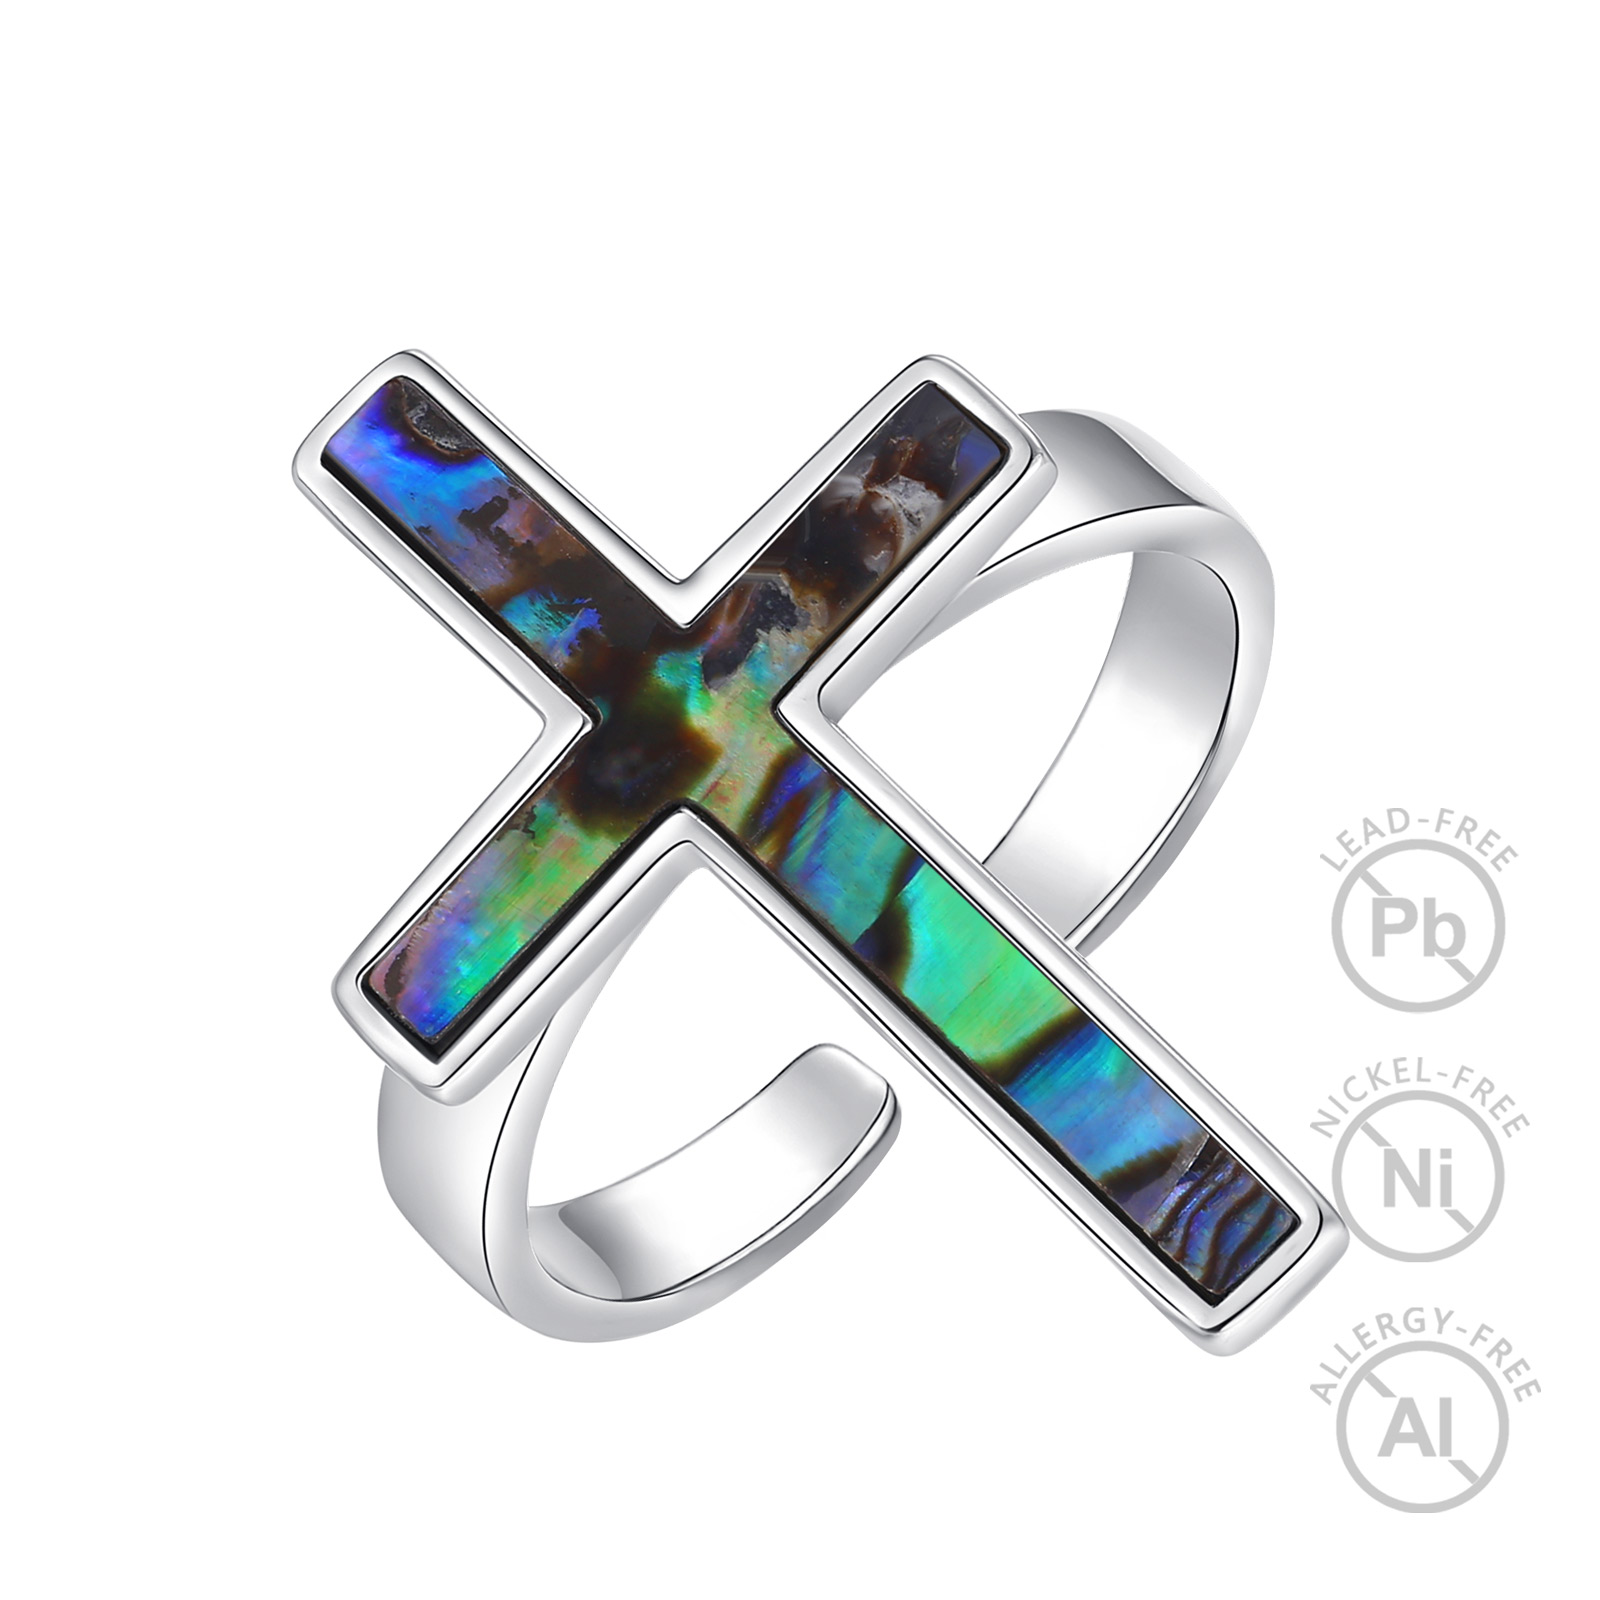 Merryshine Mens Jewelry 925 Sterling Silver Open Adjustable Size Crucifix Cross Ring With Abalone Shell